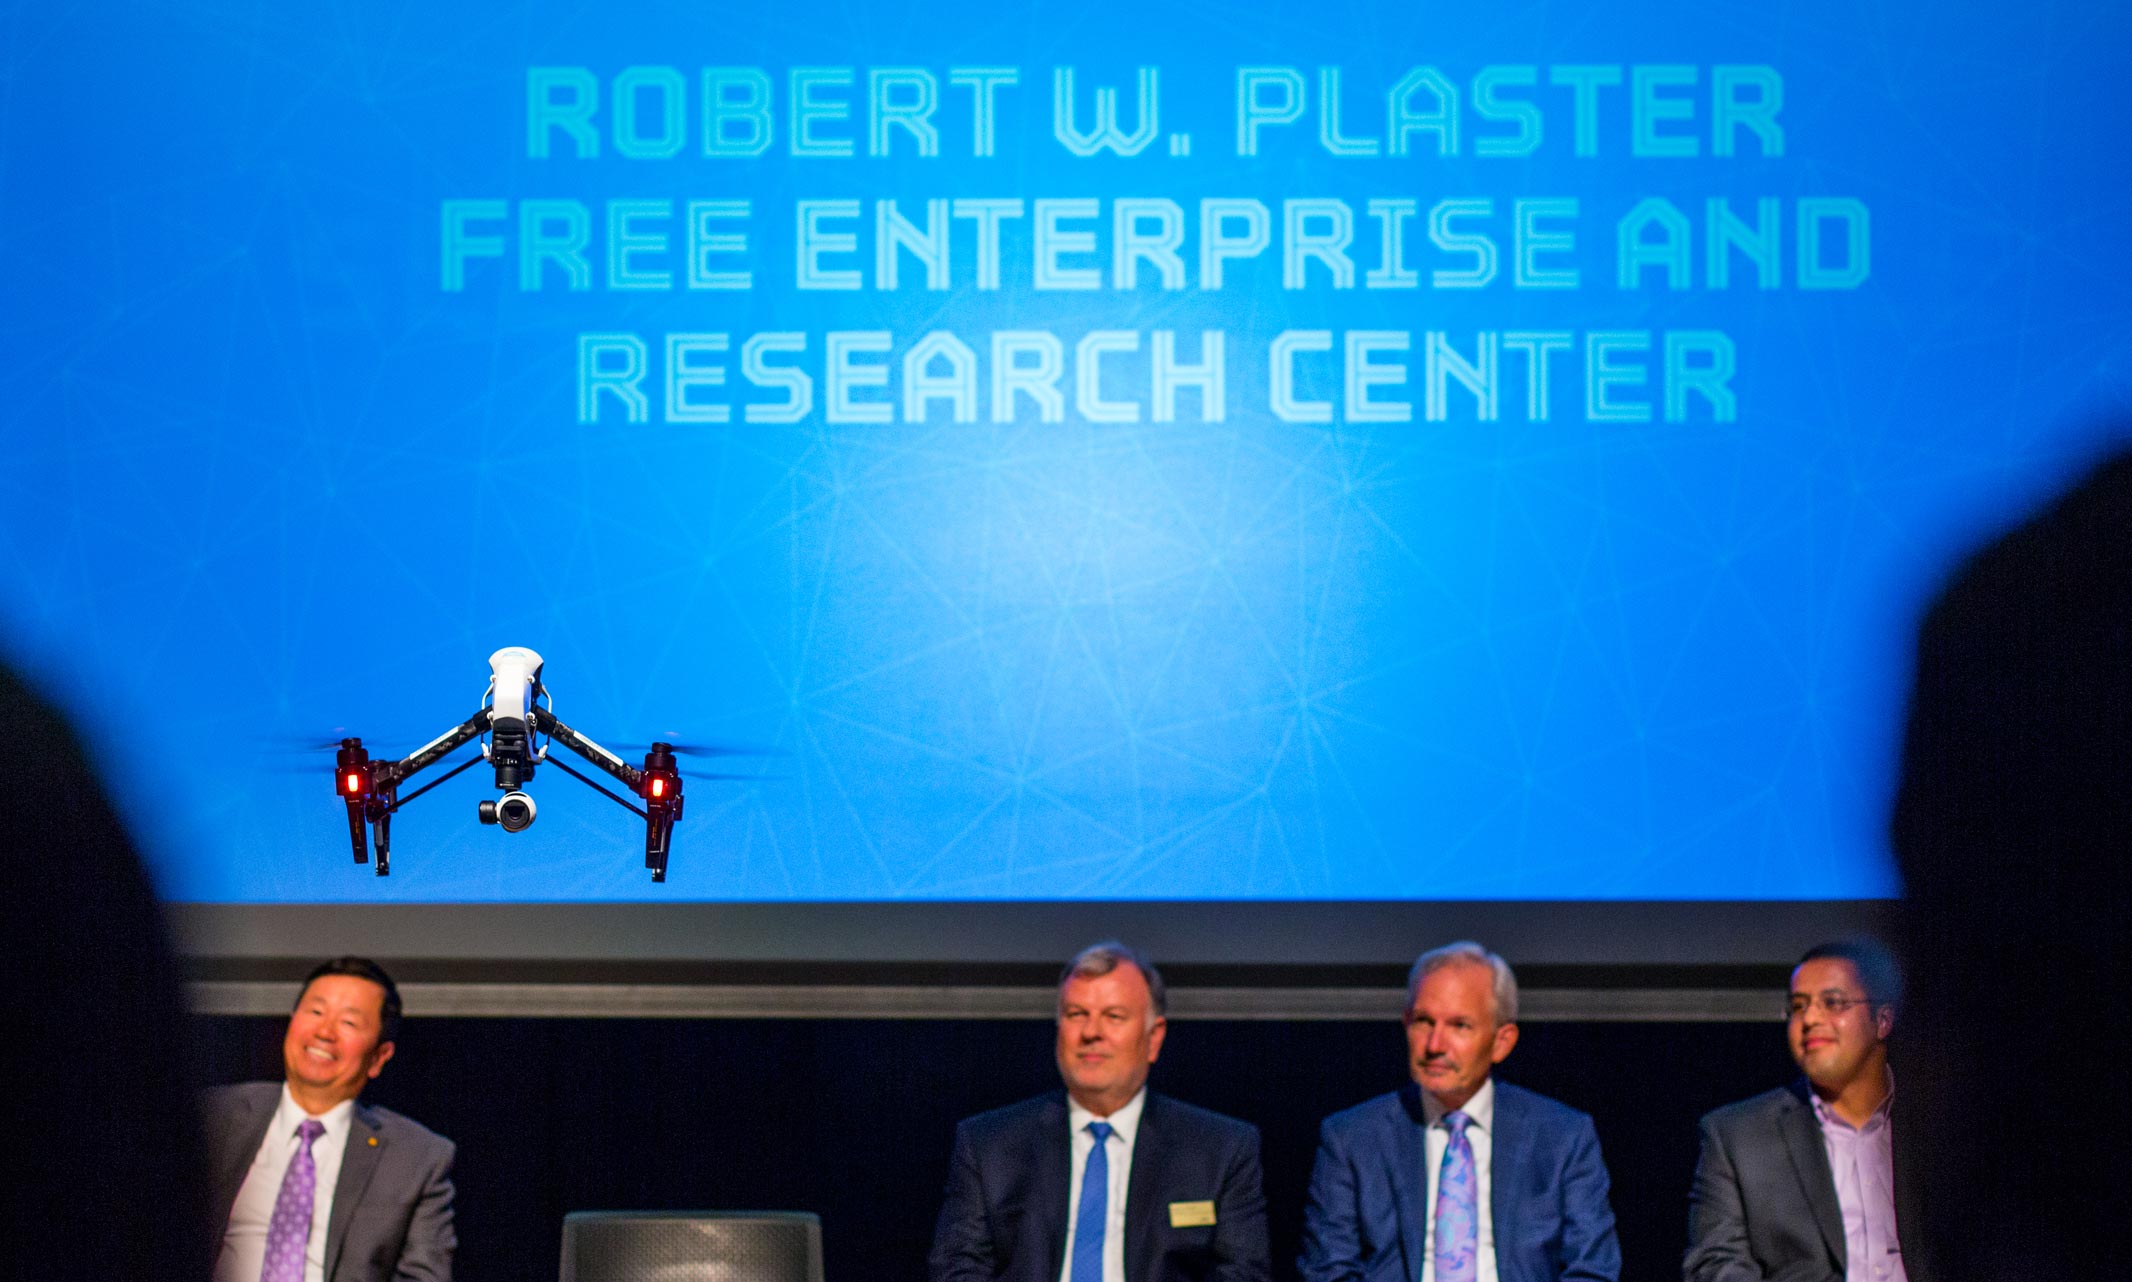 drone hovers over the stage at the research center announcement event